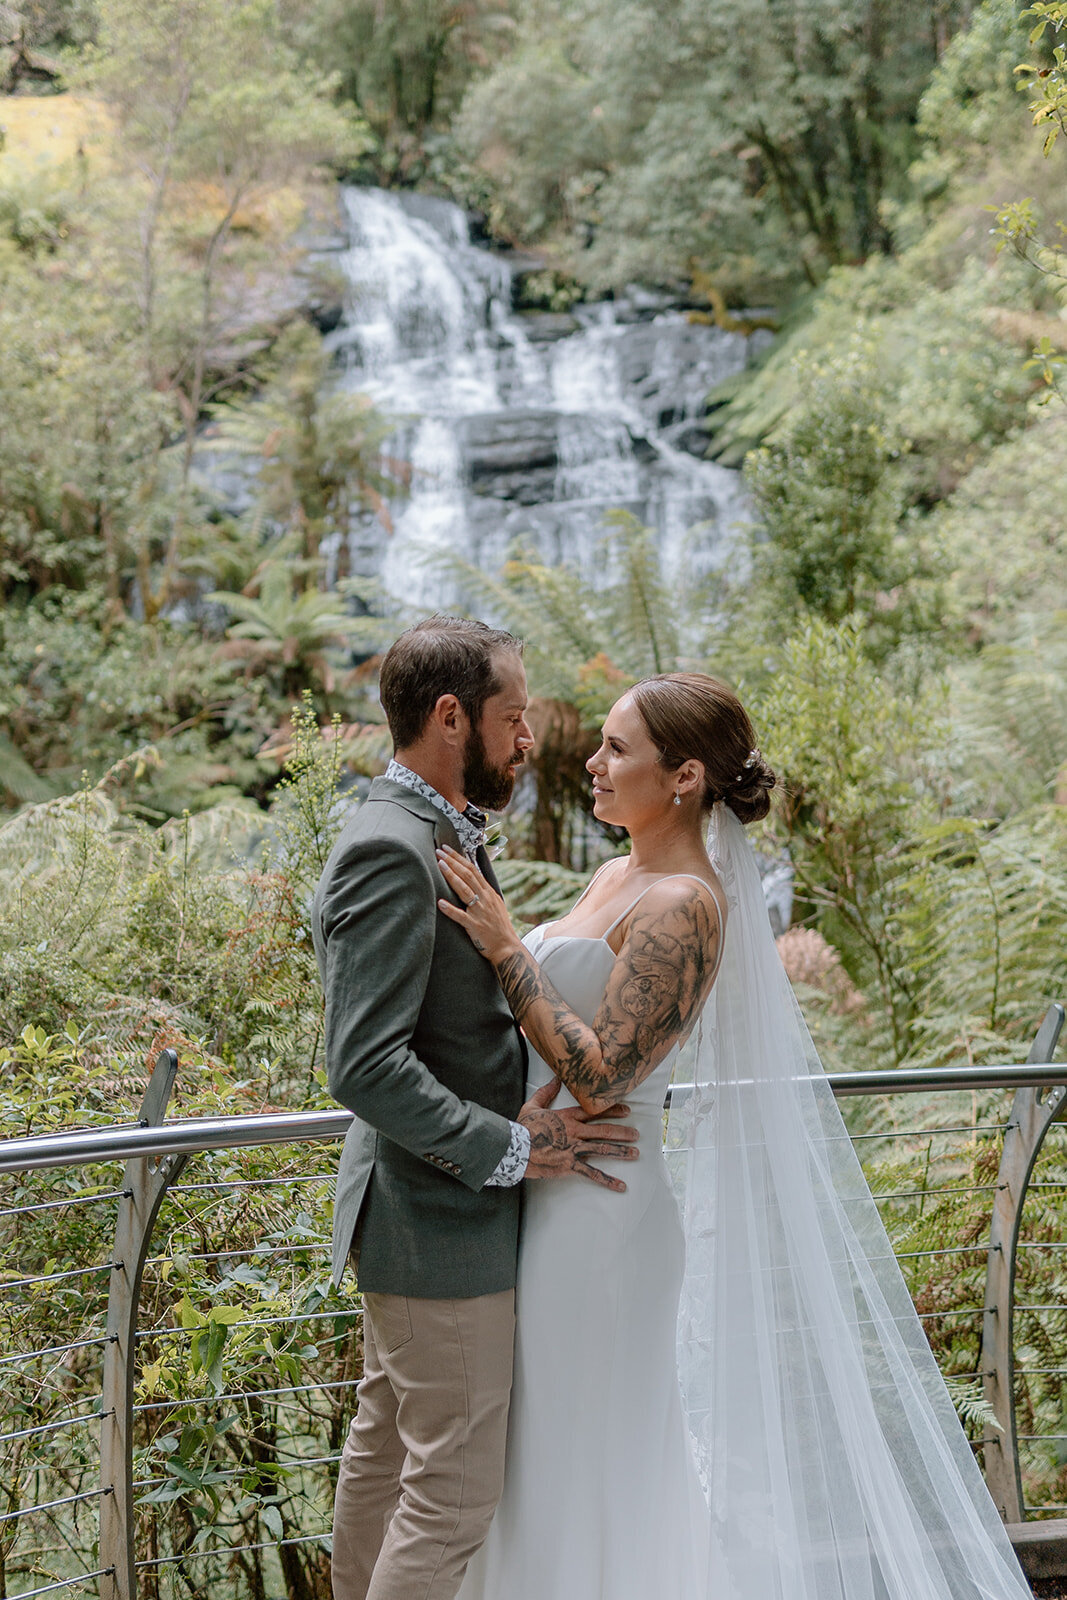 Stacey&Cory-Coast&Pines-203